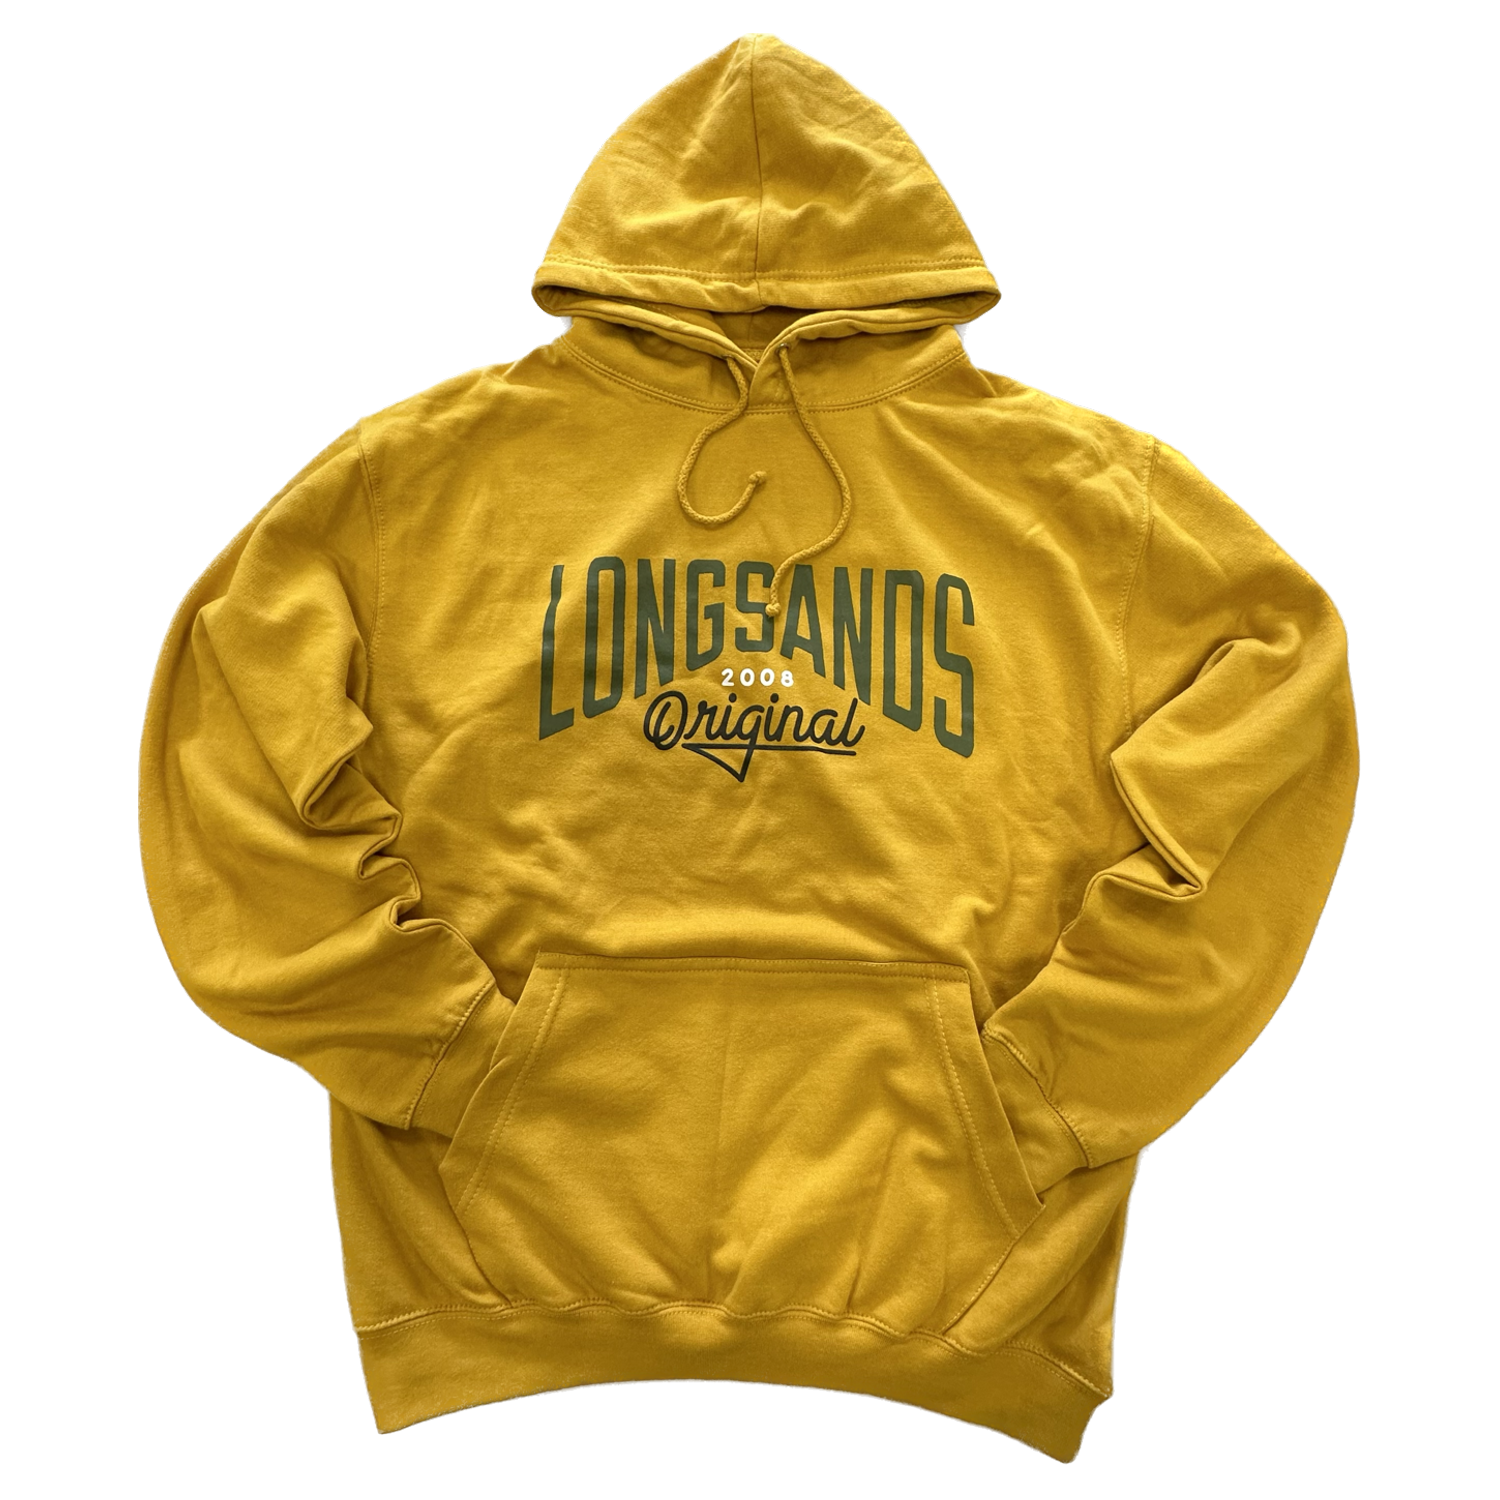 Longsands Clothing Co | UK Adventure Apparel Company Made In The North